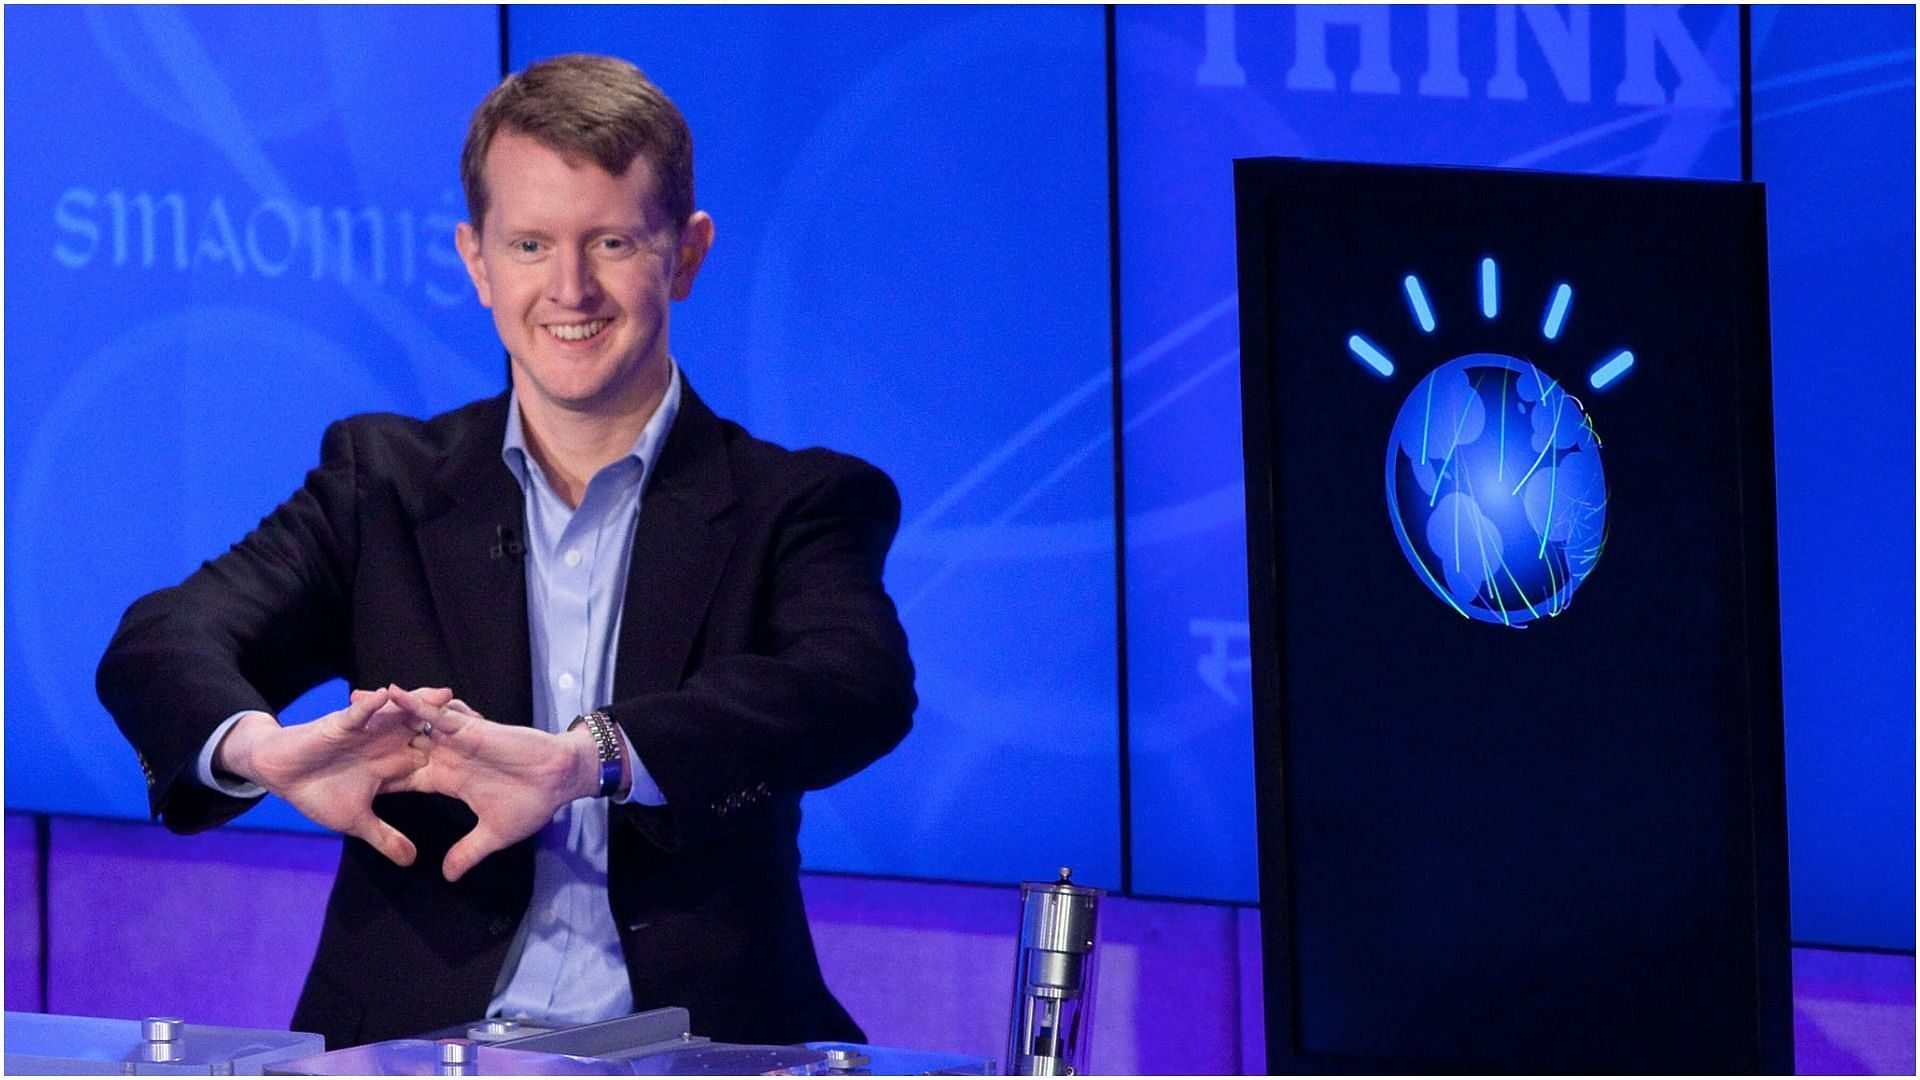 Ken Jennings competes against 'Watson' at a press conference to discuss the upcoming Man V. Machine "Jeopardy!" competition at the IBM T.J. Watson Research Center on January 13, 2011 in Yorktown Heights, New York (Image via Getty Images)